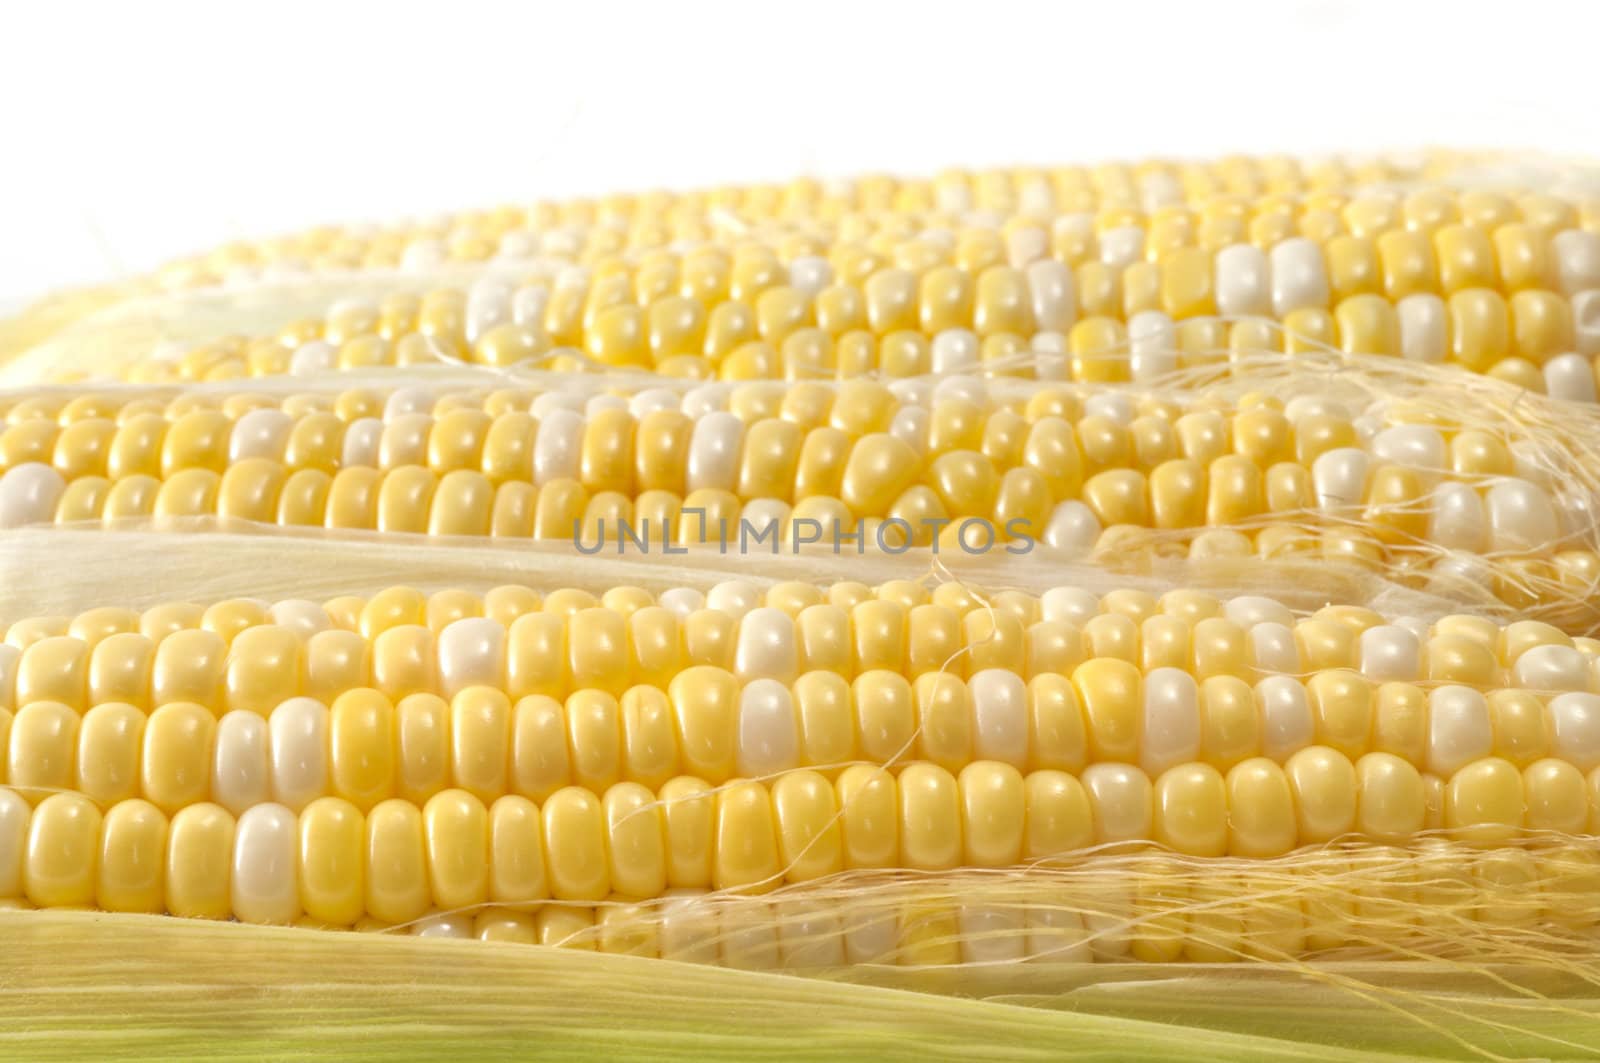 Selective focus on the foreground corn on the cob with soft focus on background cobs with copy white space 